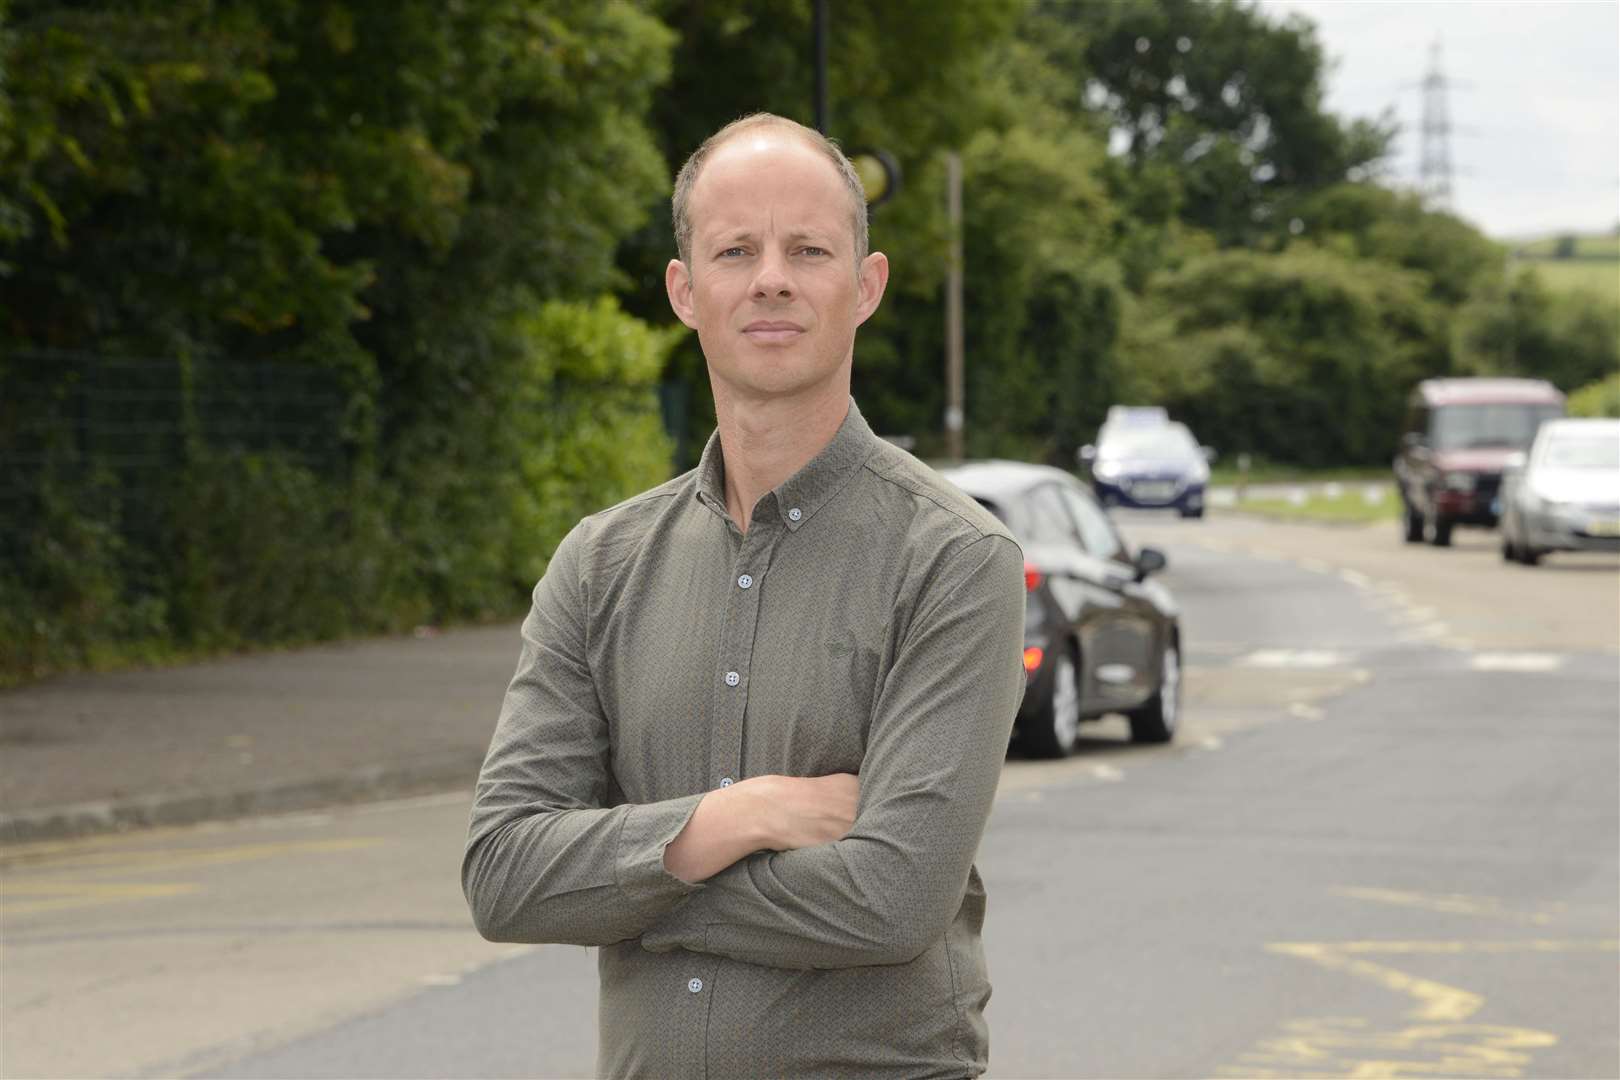 Greenhill councillor Dan Watkins previously dismissed fears surrounding the plant